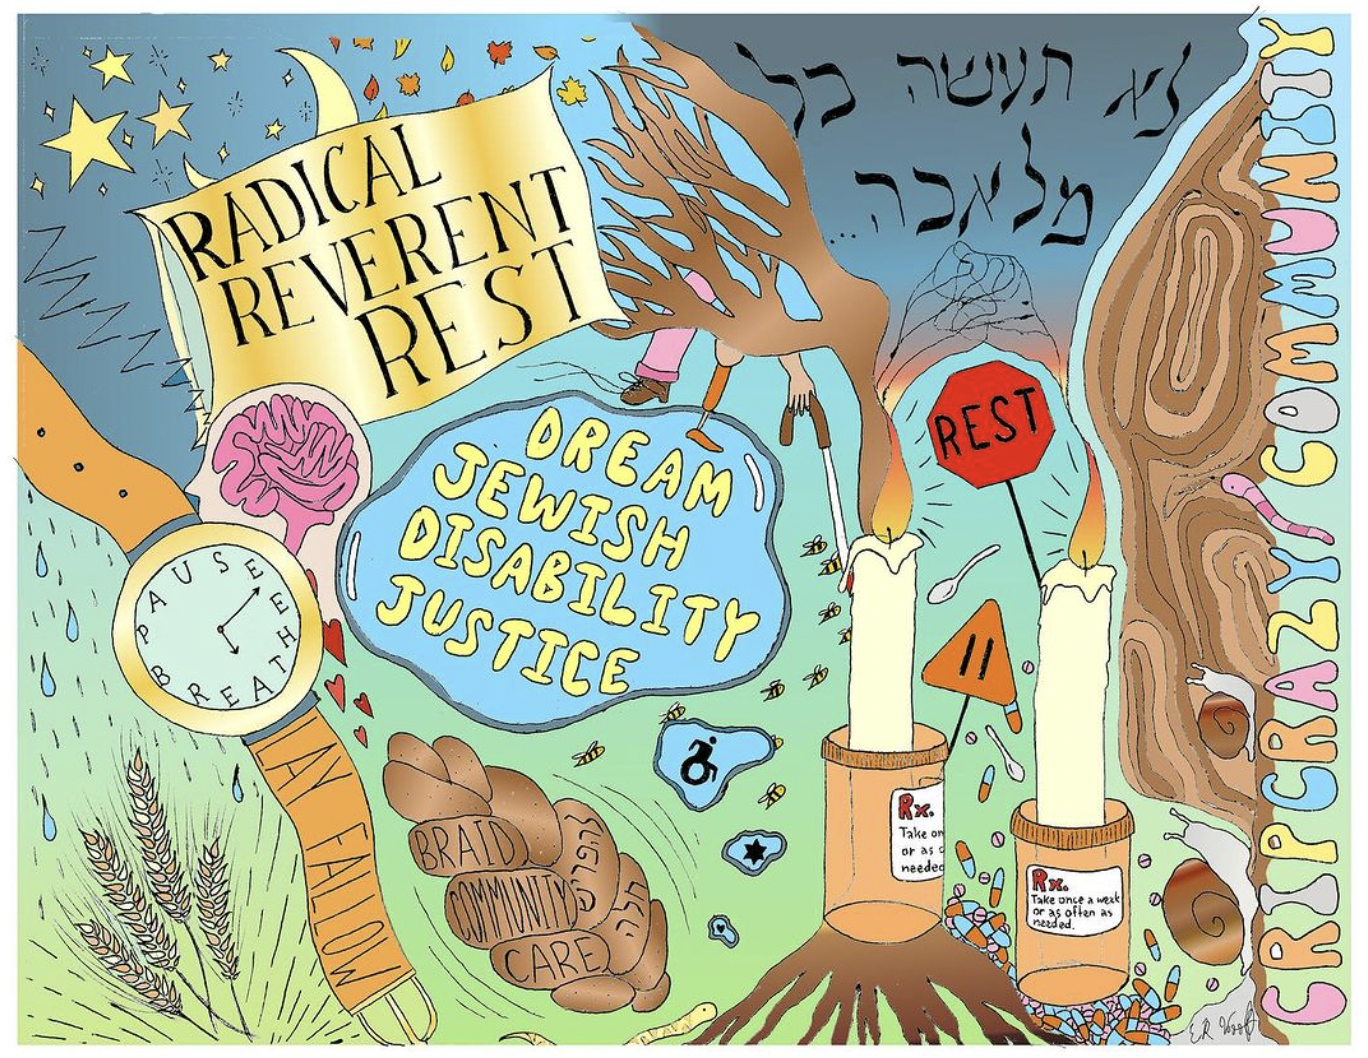 artistic image of shabbat candles, a watch, and a night sky, challah and grass, that says "dream jewish disability justice" and "radical reverent rest"